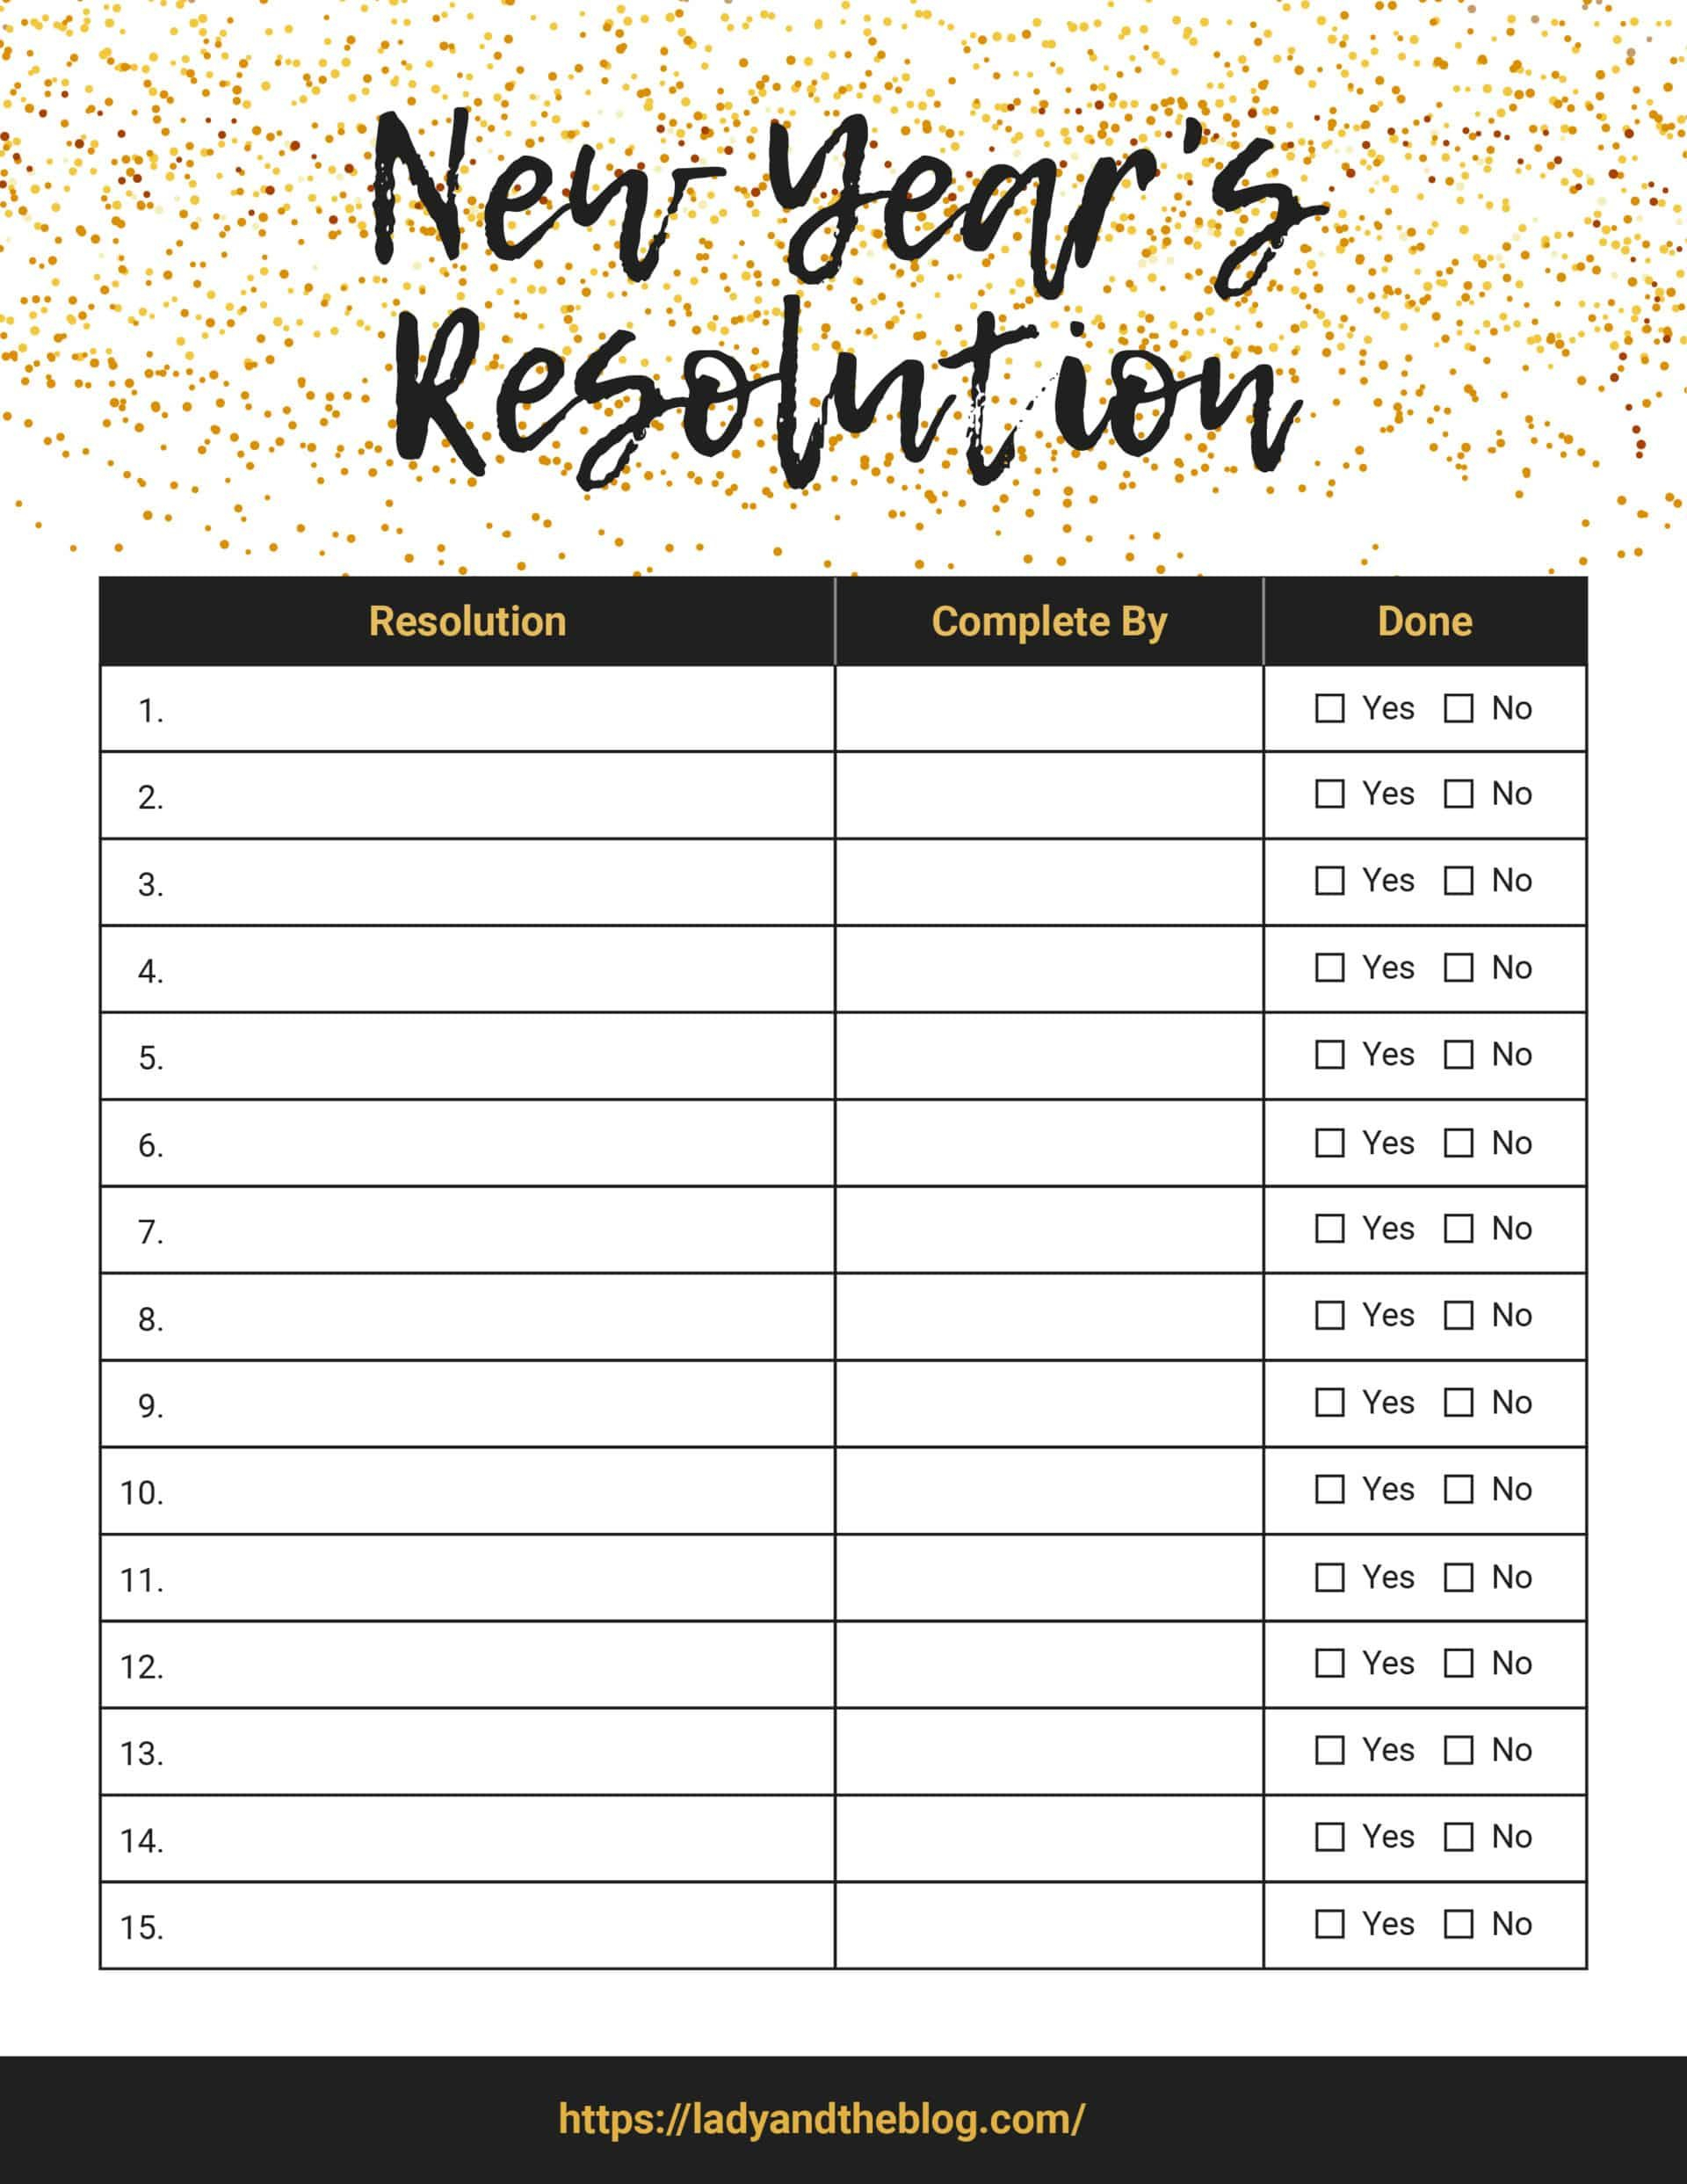 New Year s Resolution List Free Download New Years Resolution List 